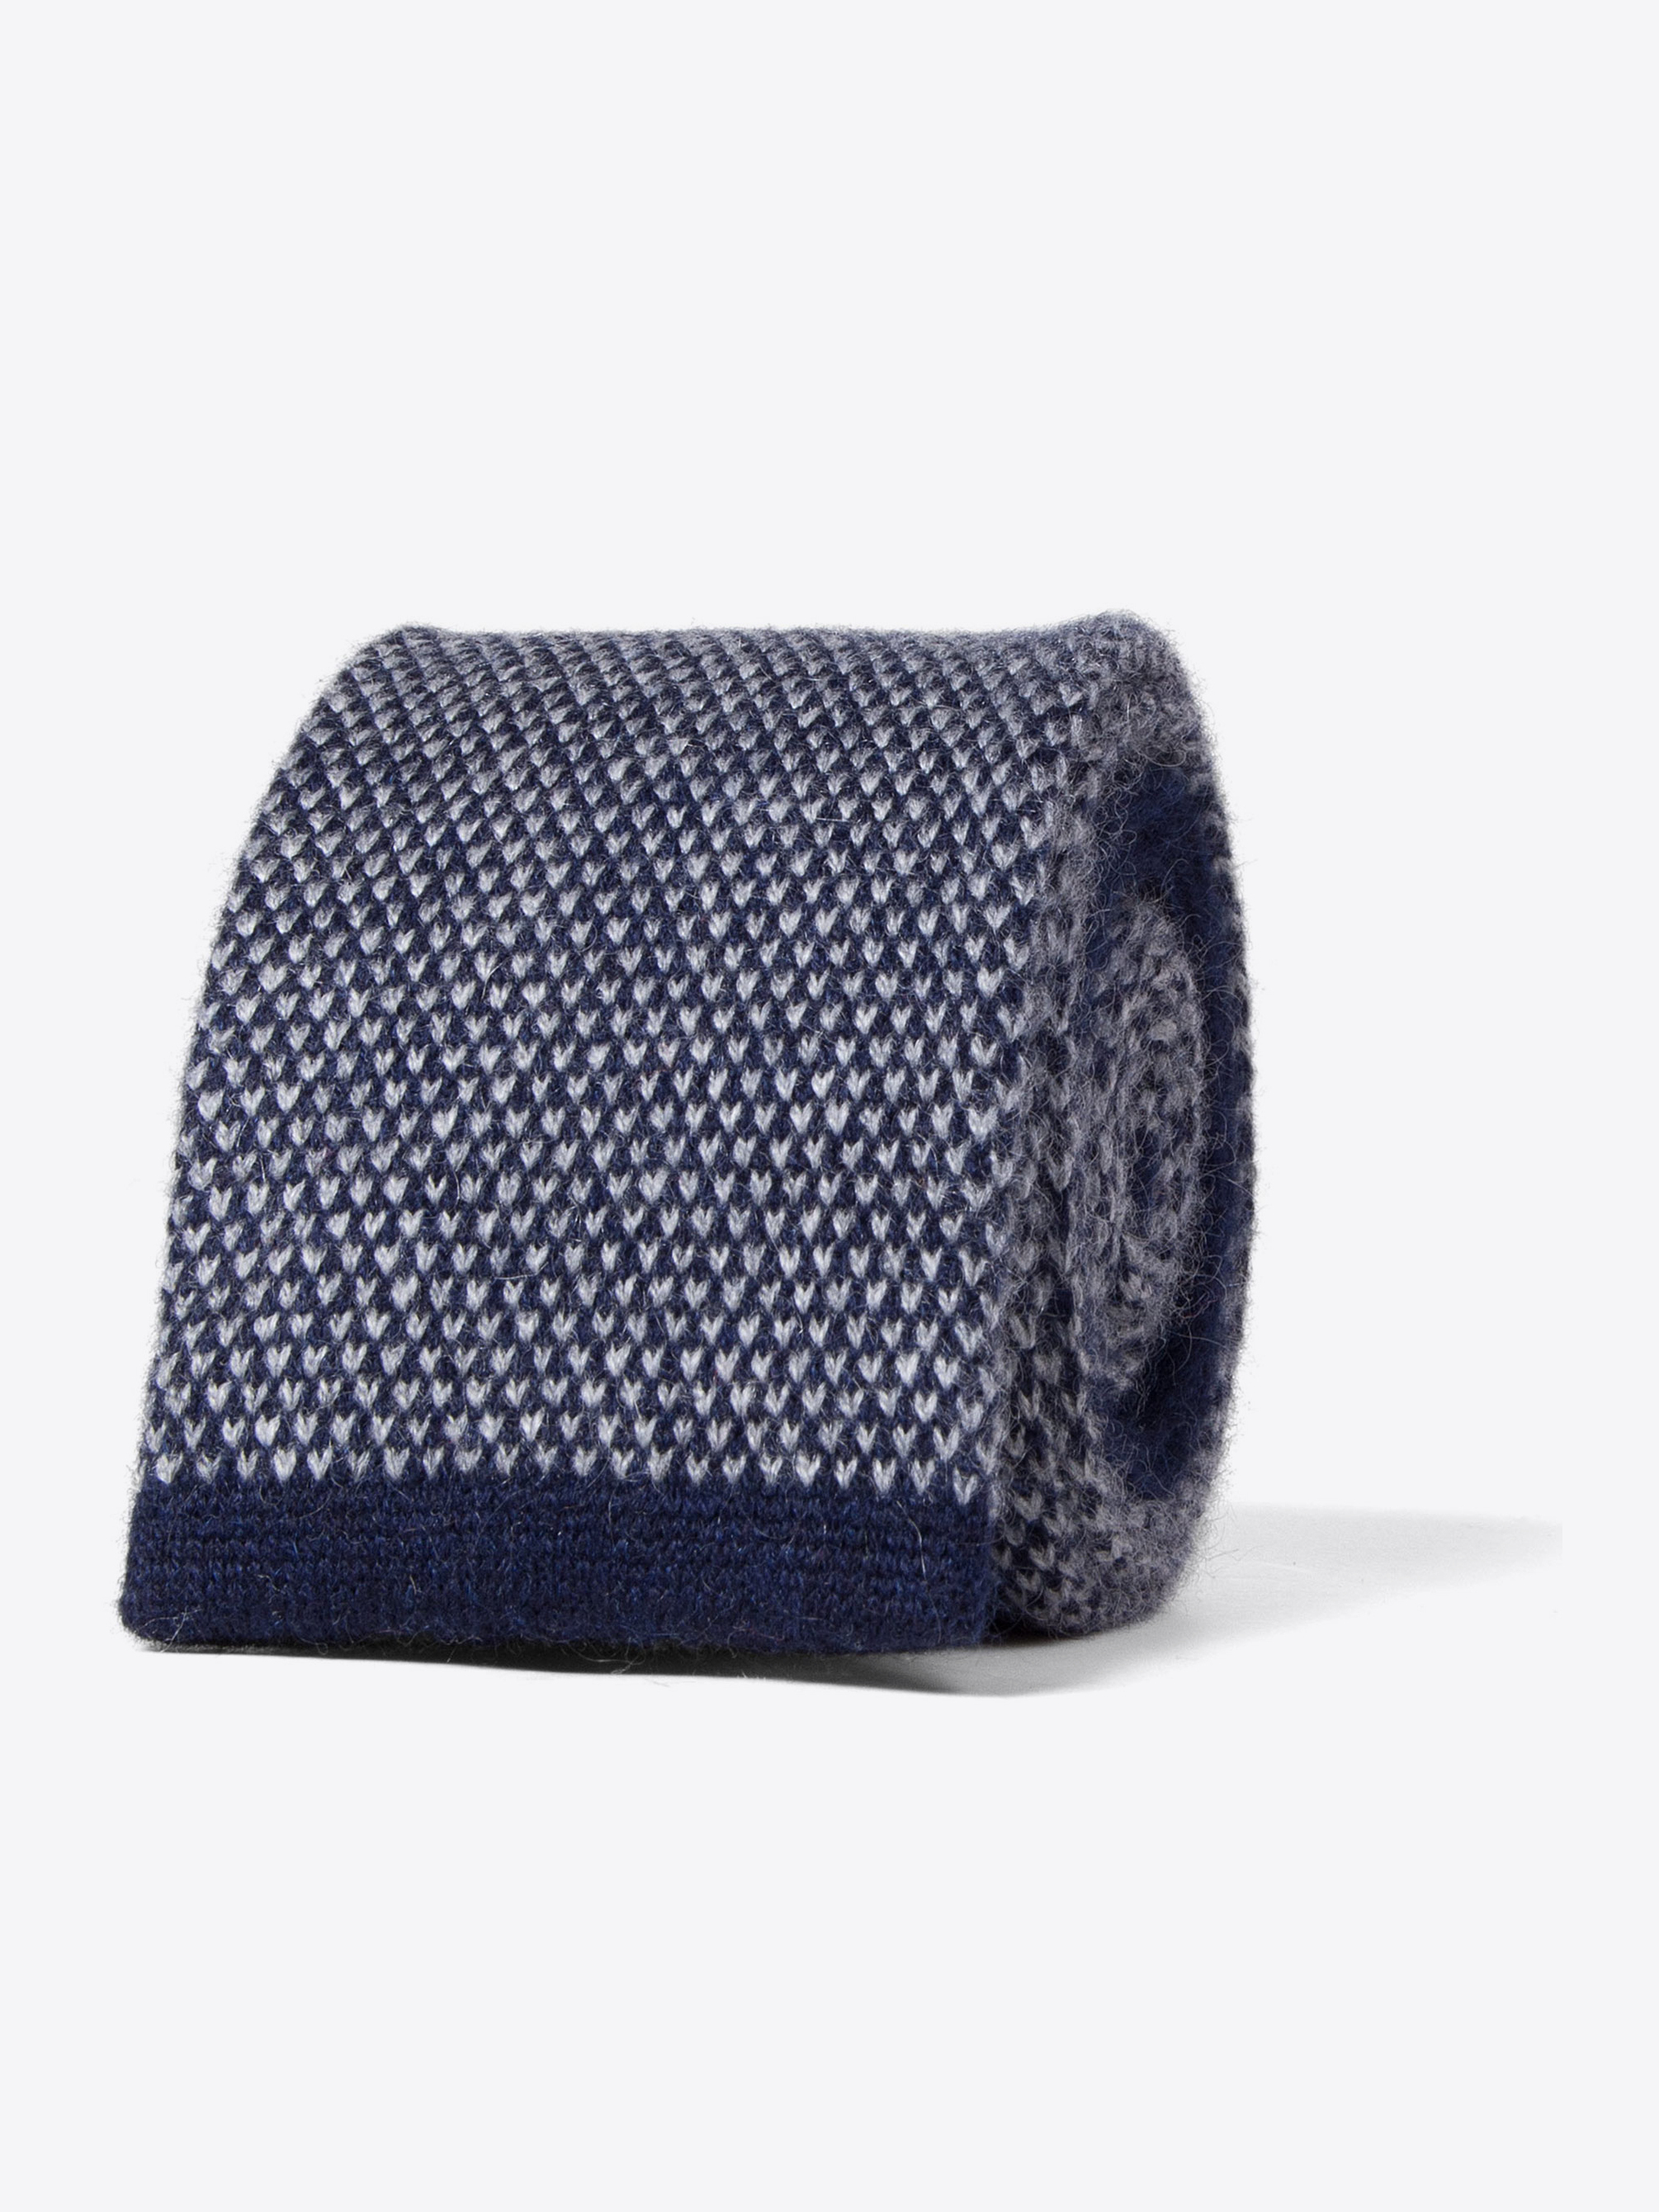 Zoom Image of Torino Navy Cashmere Knit Tie